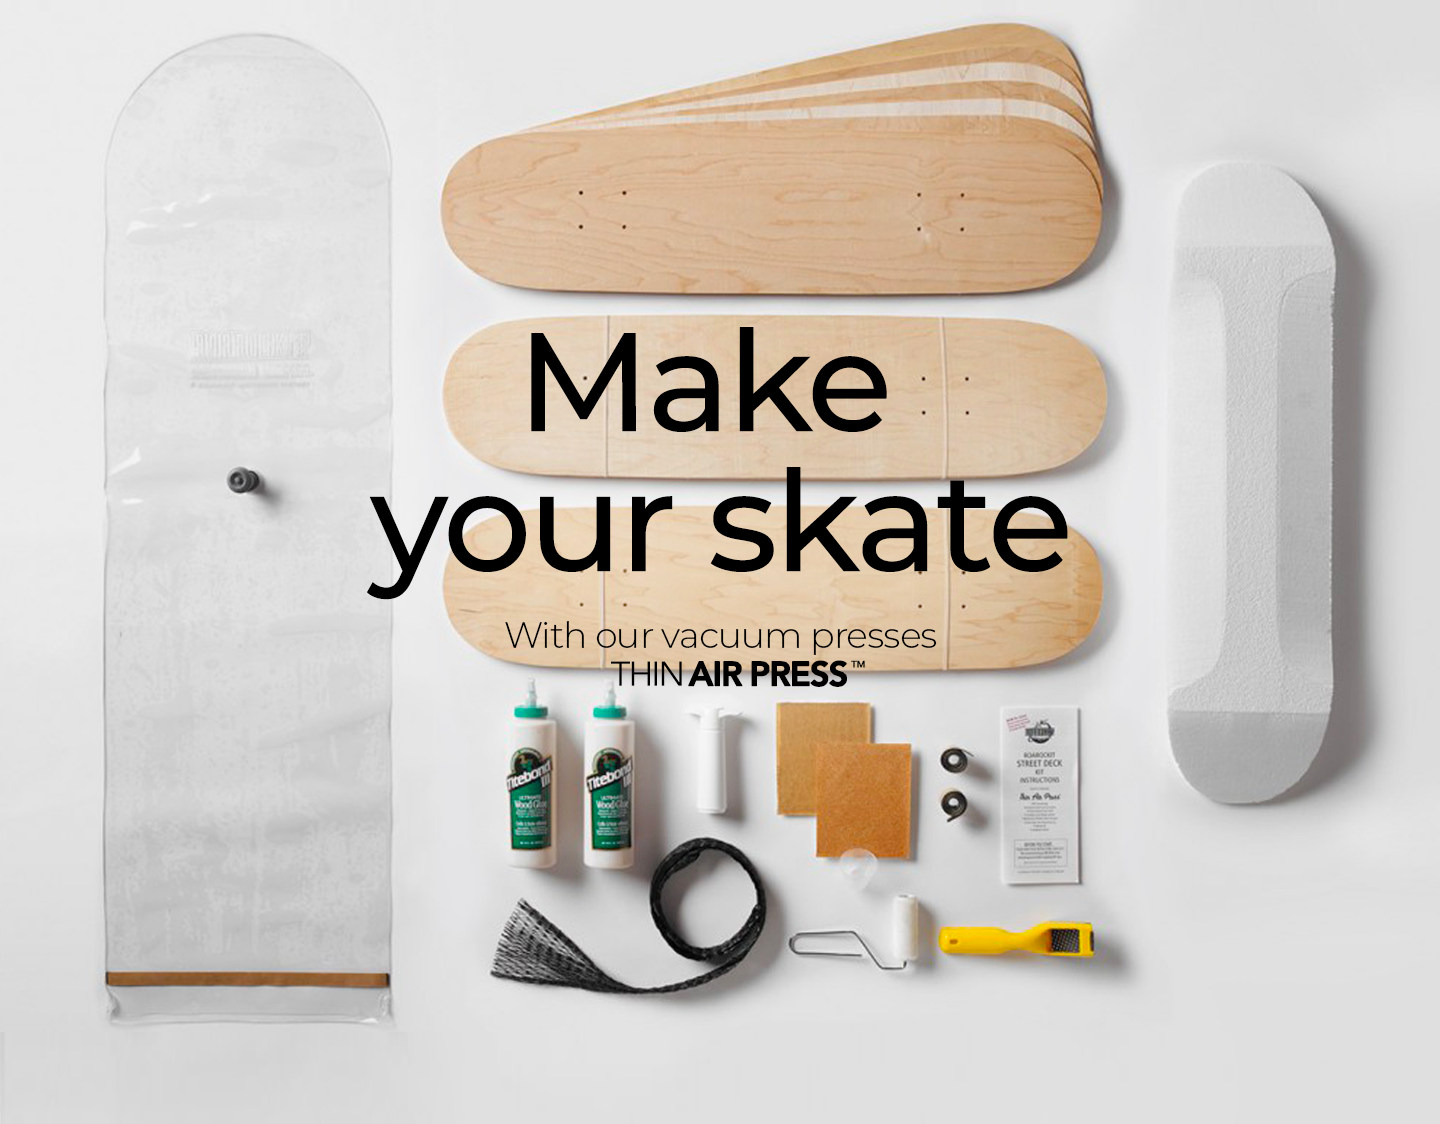 Roarockit : Build own custom skateboards with Canadian maple veneer the vacuum technology of the Thin Air Press